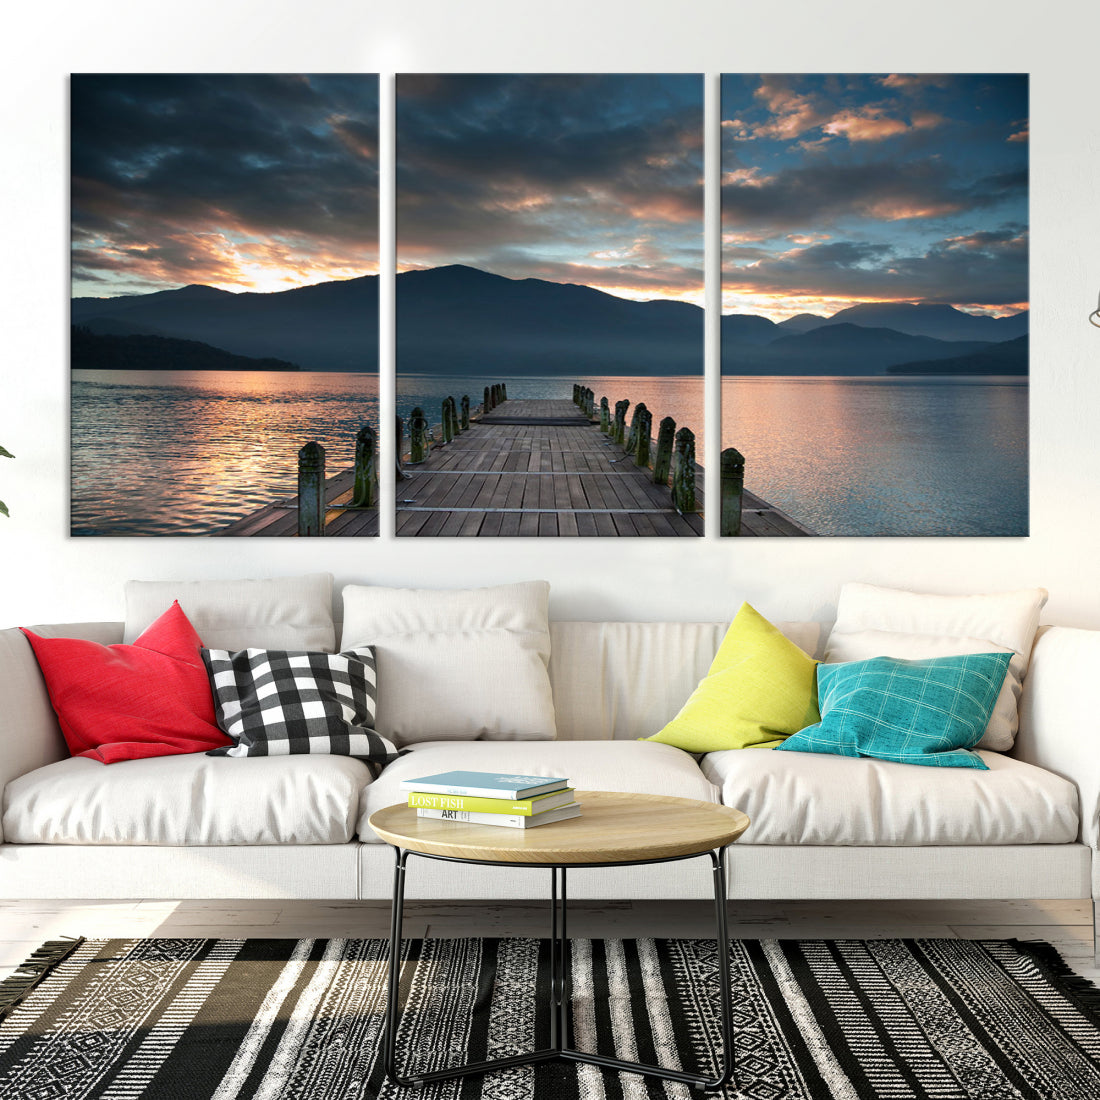 Amazing Sunset from Wooden Pier Canvas Print Relaxing Wall Art Large Living Room Wall Decor